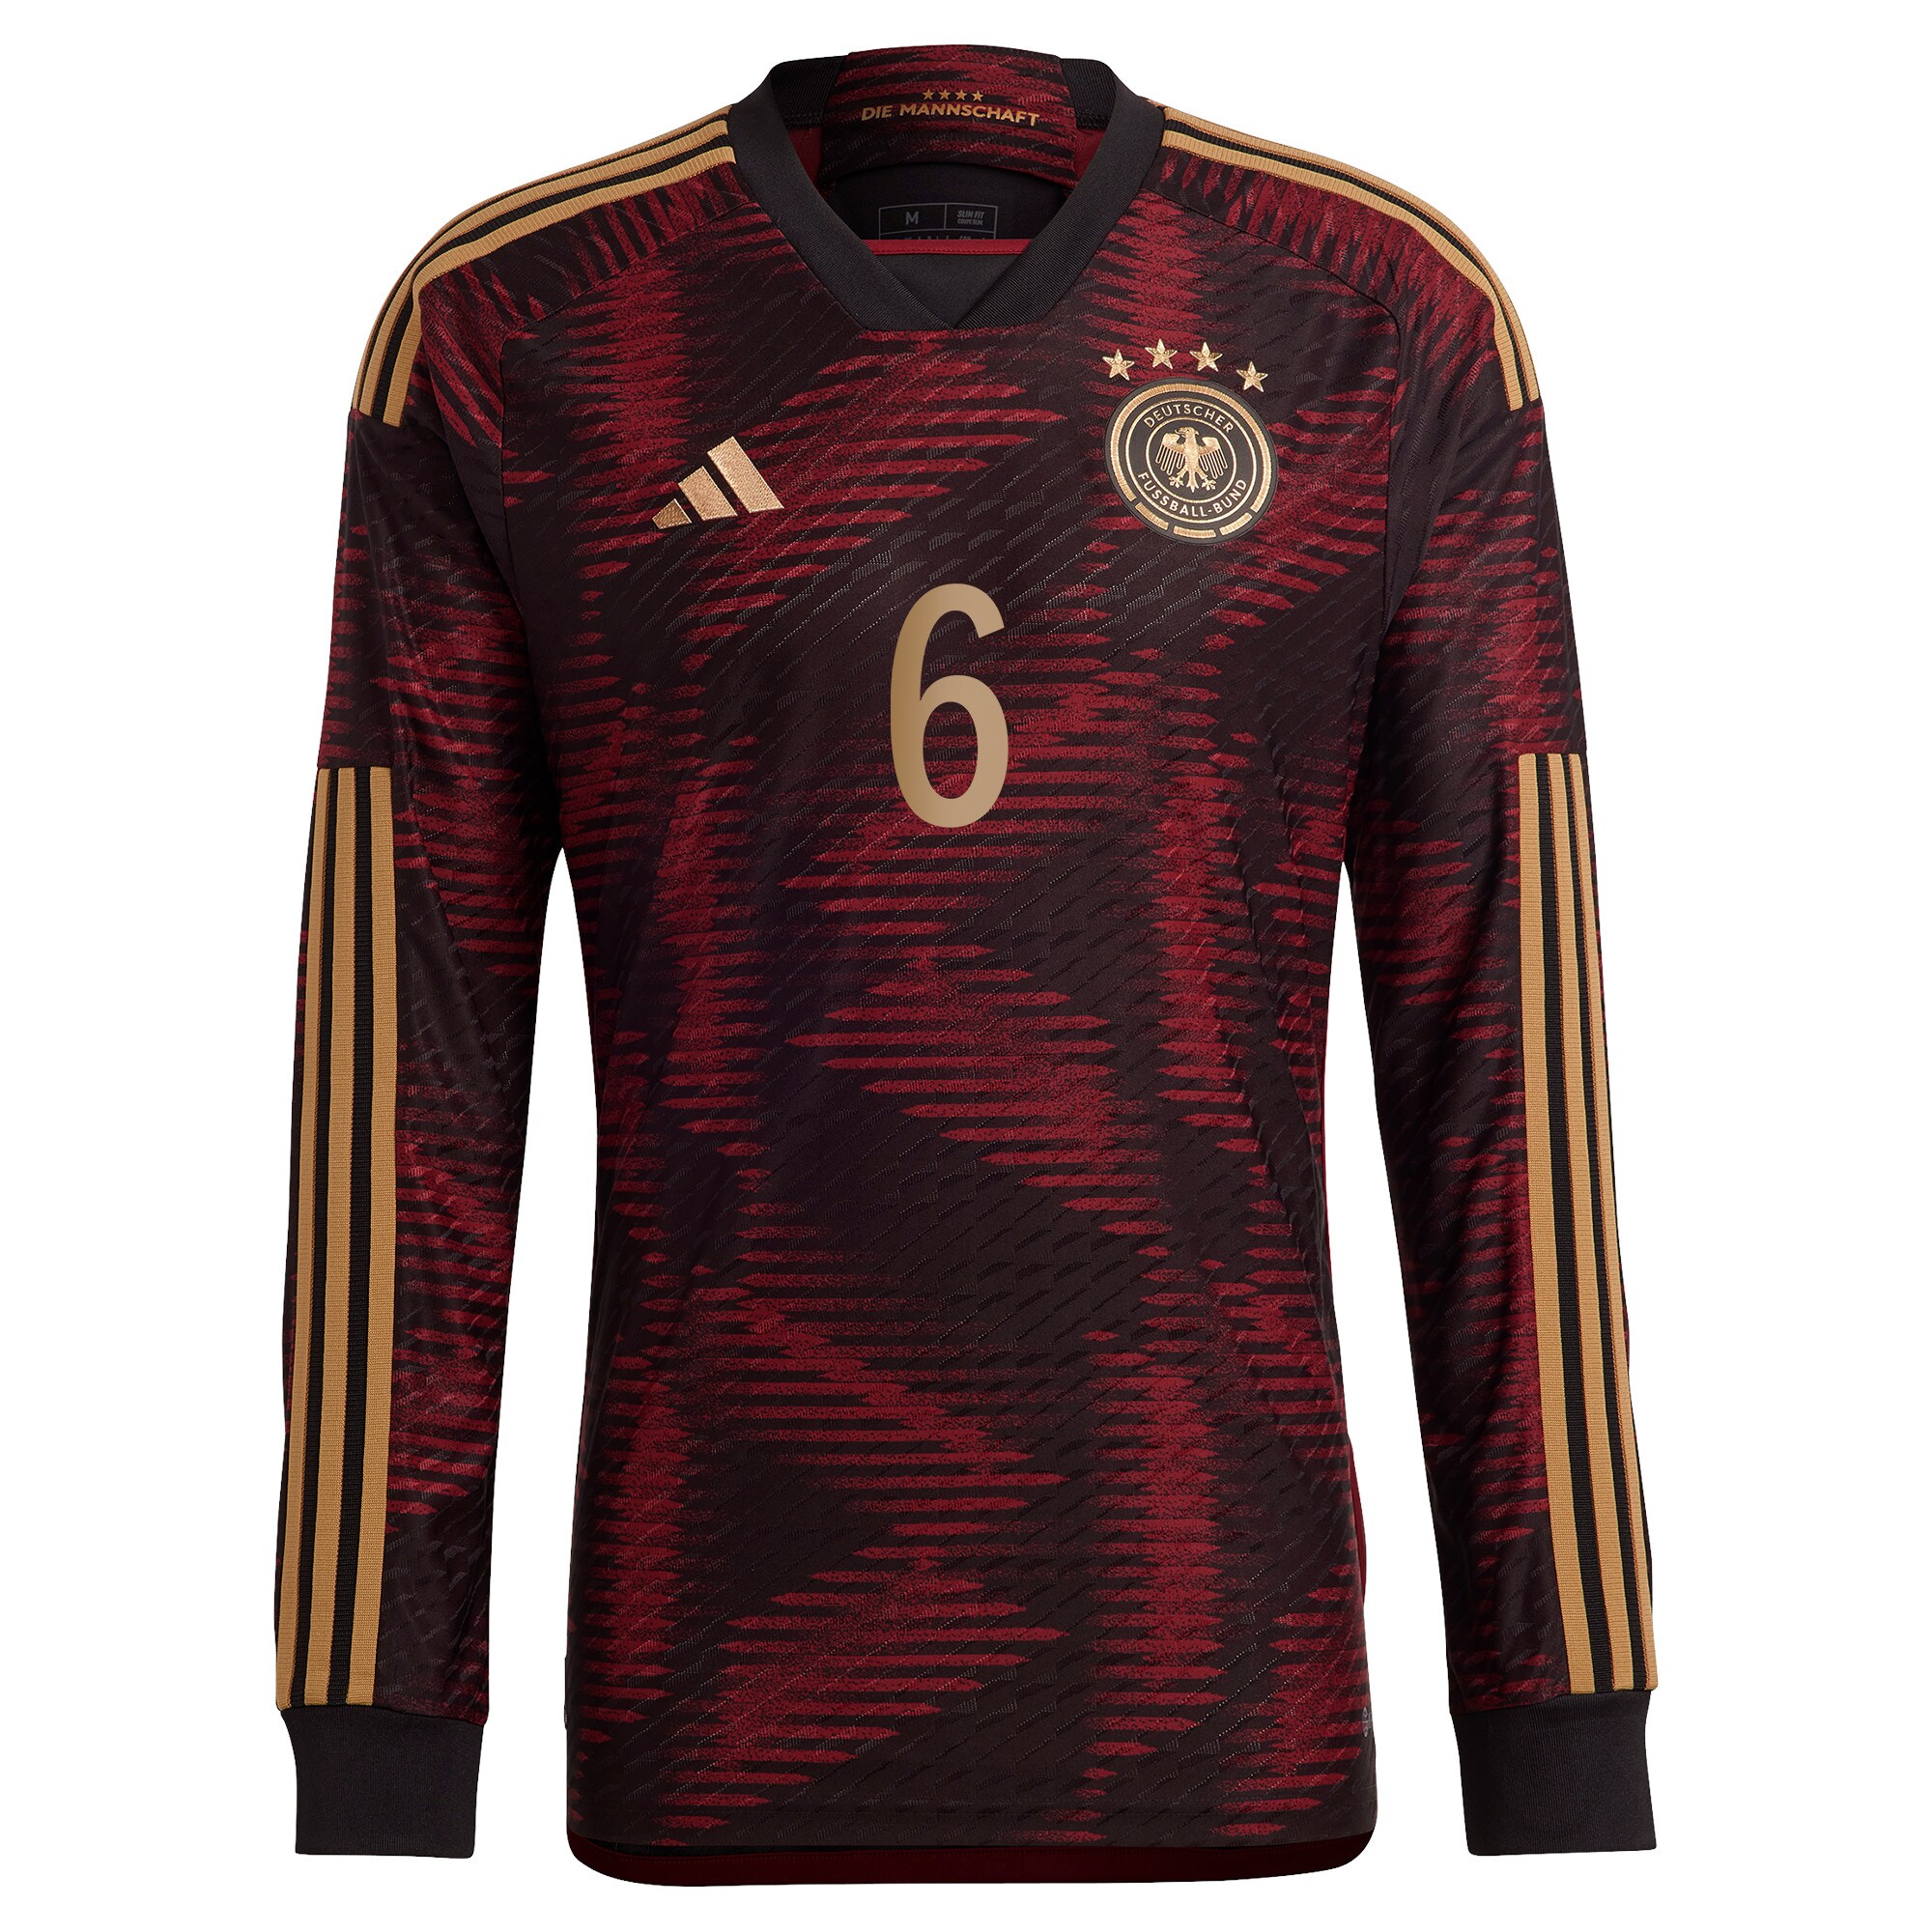 Germany Away Authentic Shirt Long Sleeve with Kimmich 6 printing